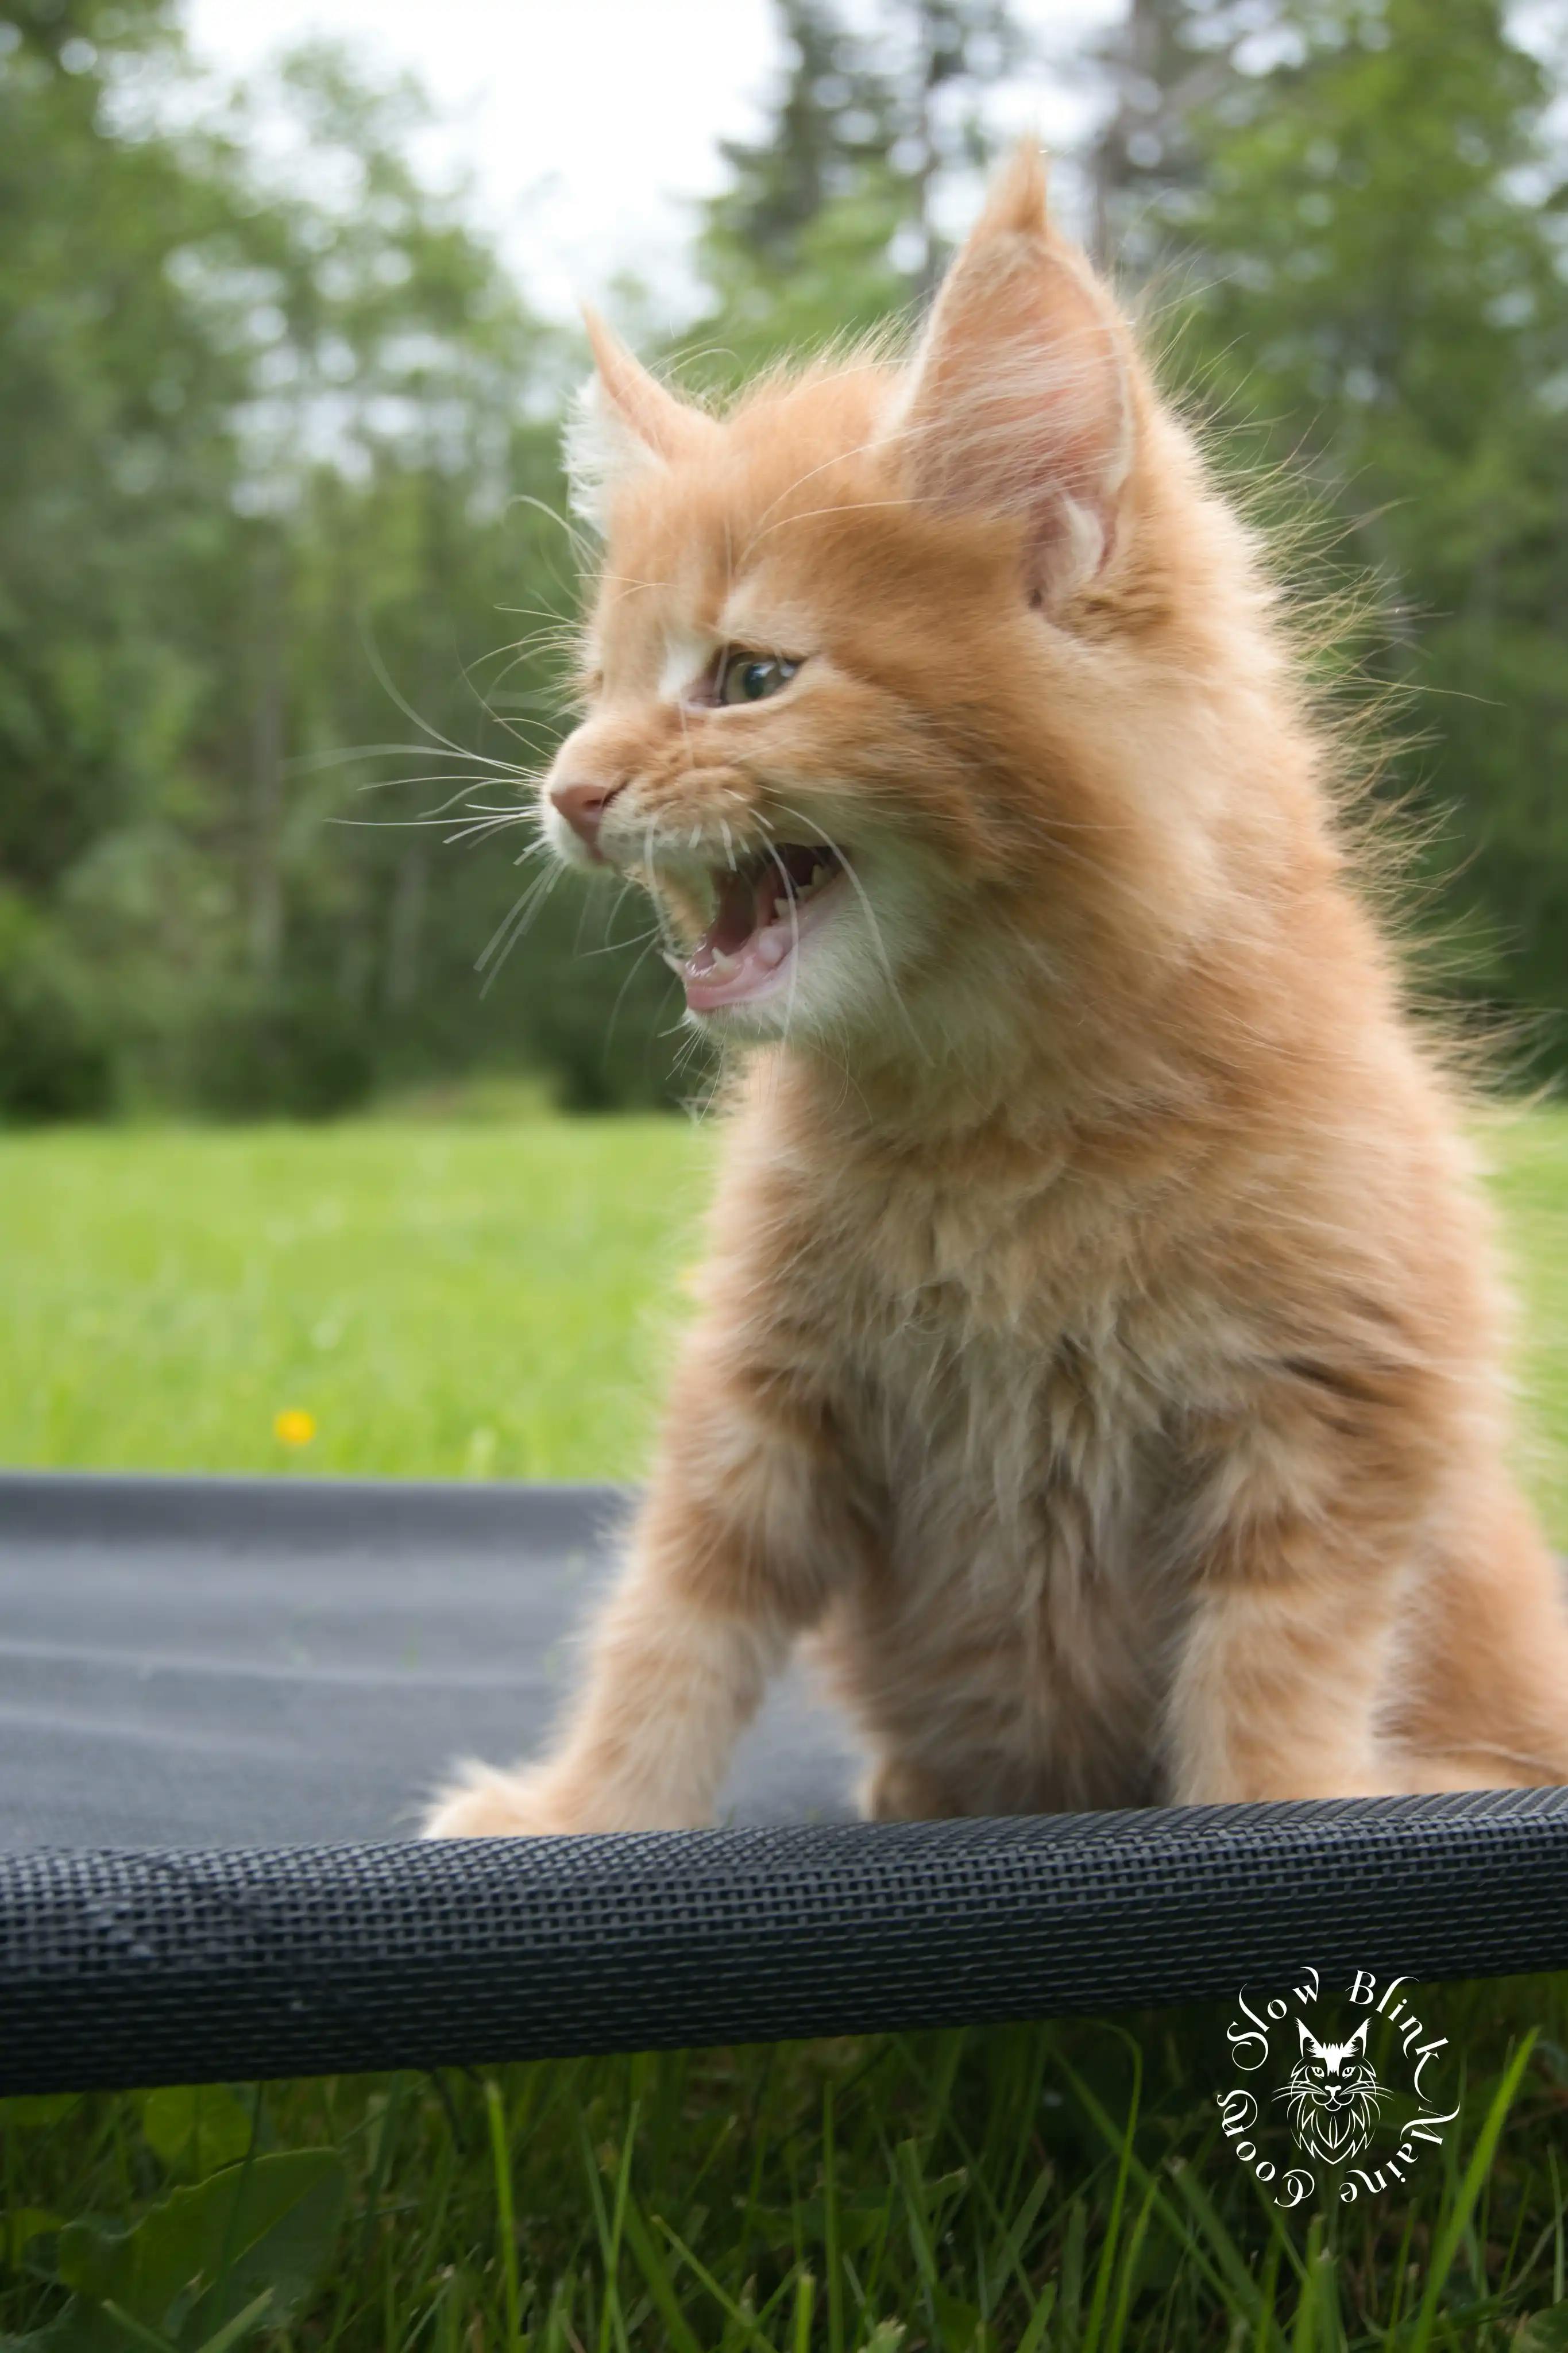 Orange (Red) Maine Coon Kittens > red orange maine coon kitten | slowblinkmainecoons | ems code d ds ds 22 1 18